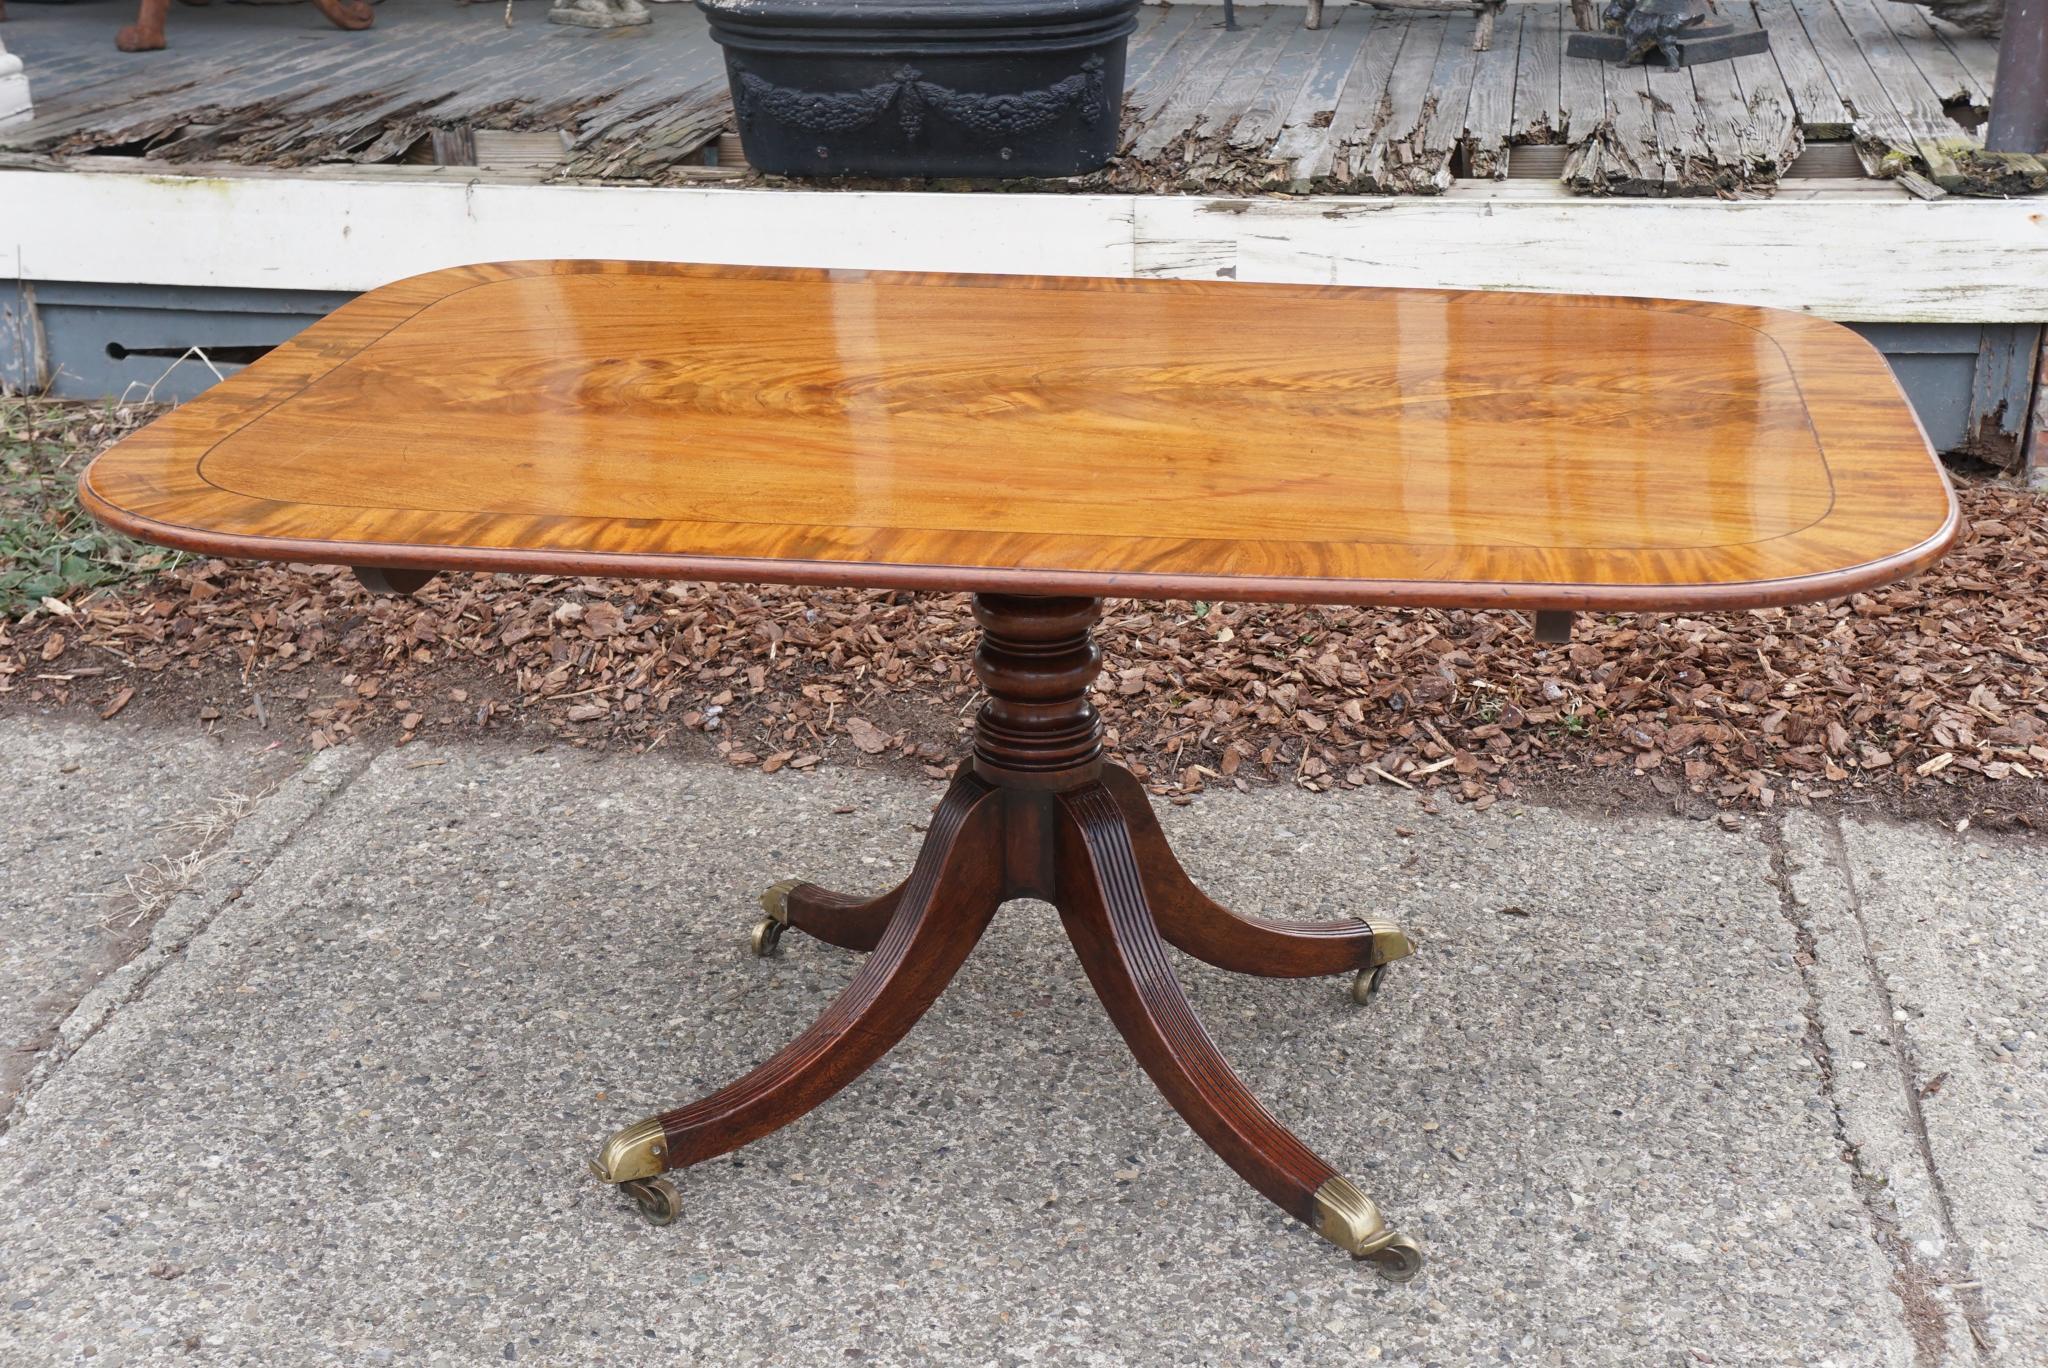 This fine period table, circa 1790-1800, is made of the finest imported Cuban mahogany. This kind of board lumber was a prized material from England's great Colonial holdings and would have cost 5 or 6 times the amount of the best local timbers. The